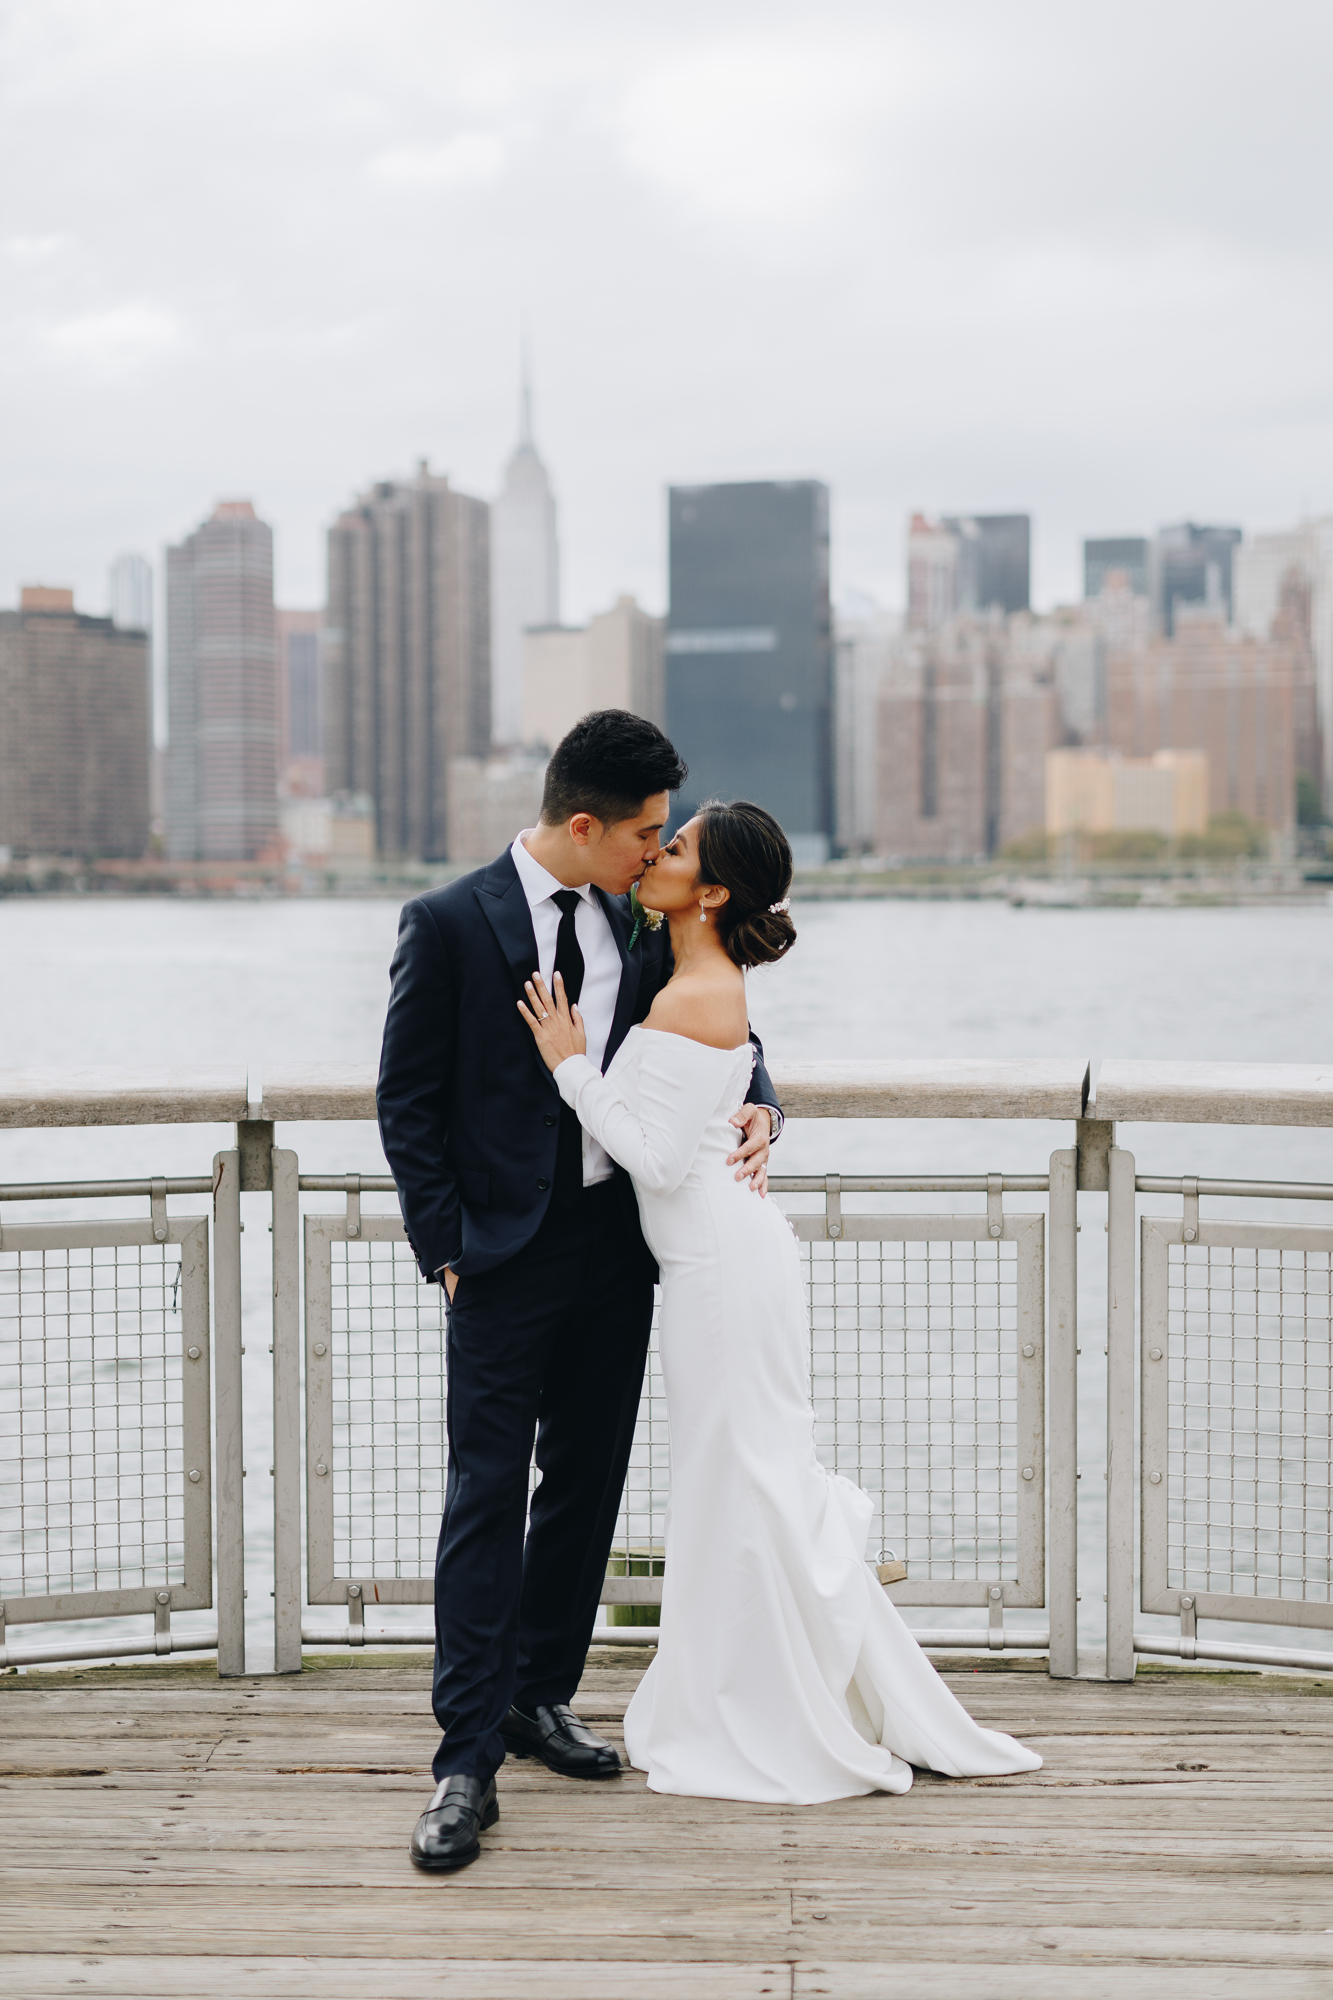 Pretty Elopement Photos in NYC